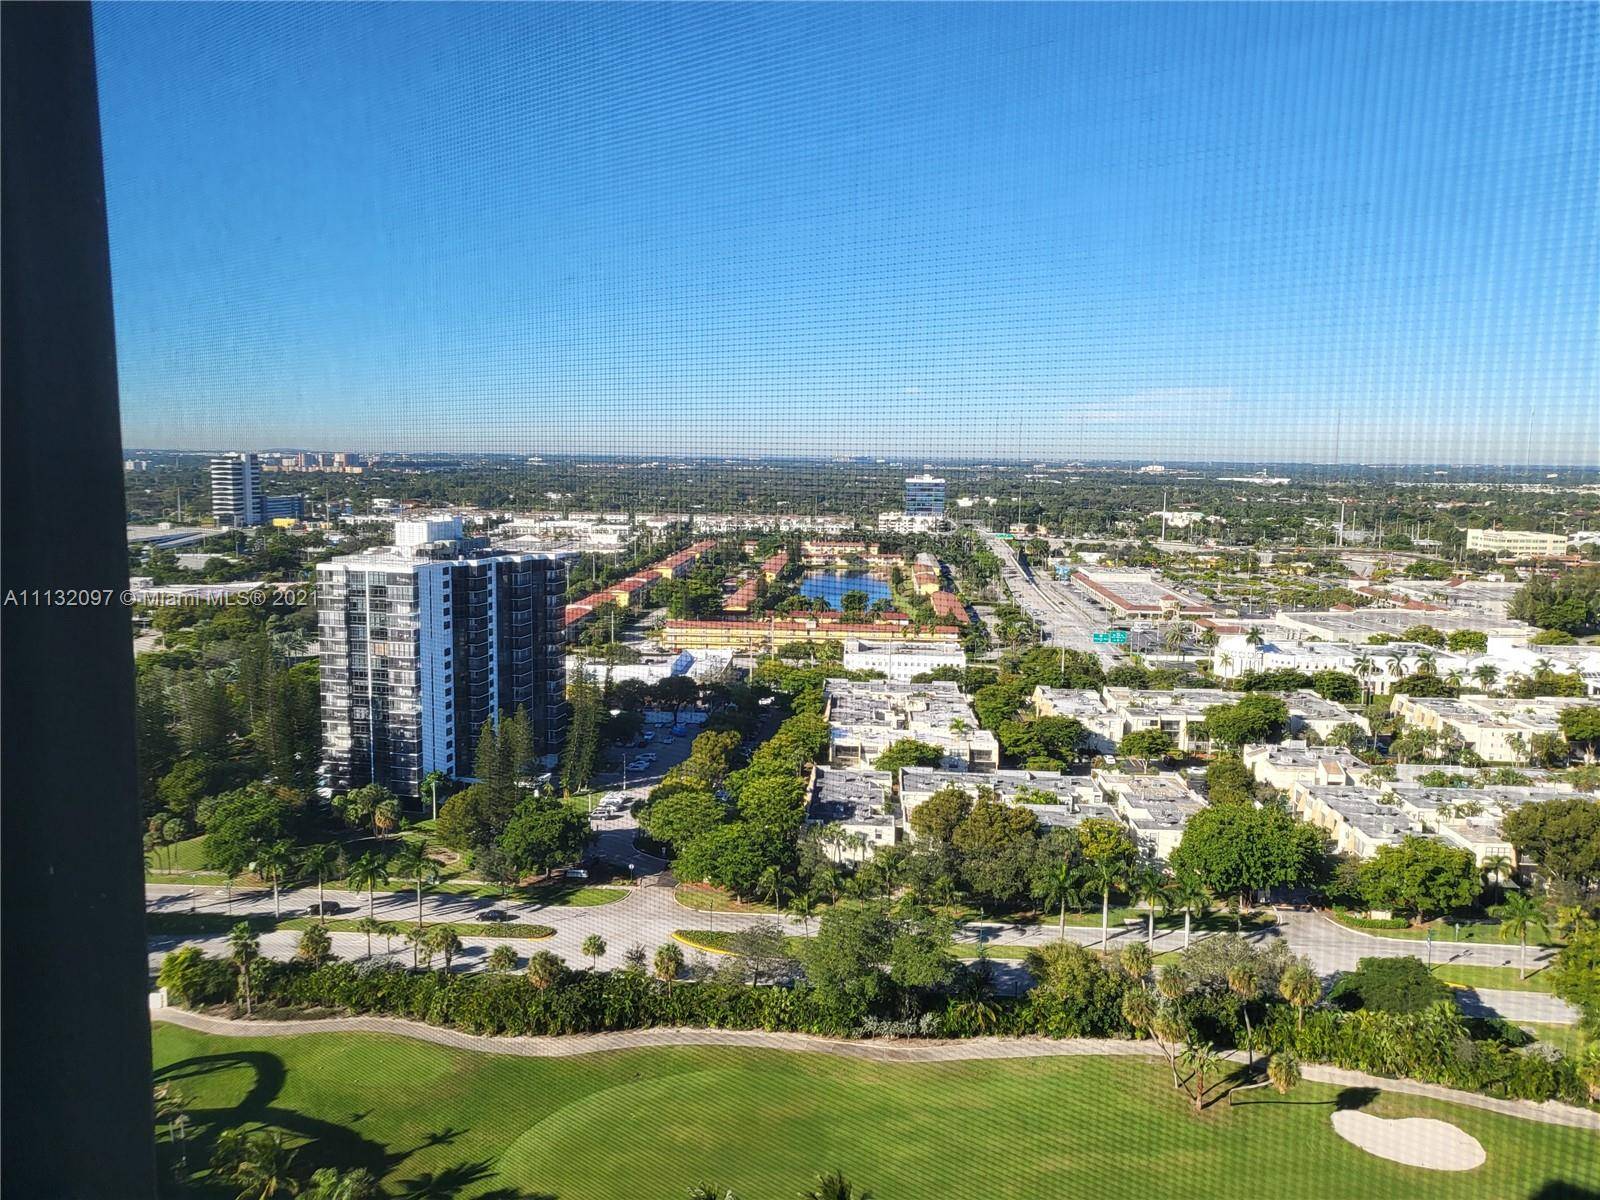 Wonderful Penthouse in the heart of Aventura with a renovated kitchen, stainless steel appliances, granite countertops, wood flooring.